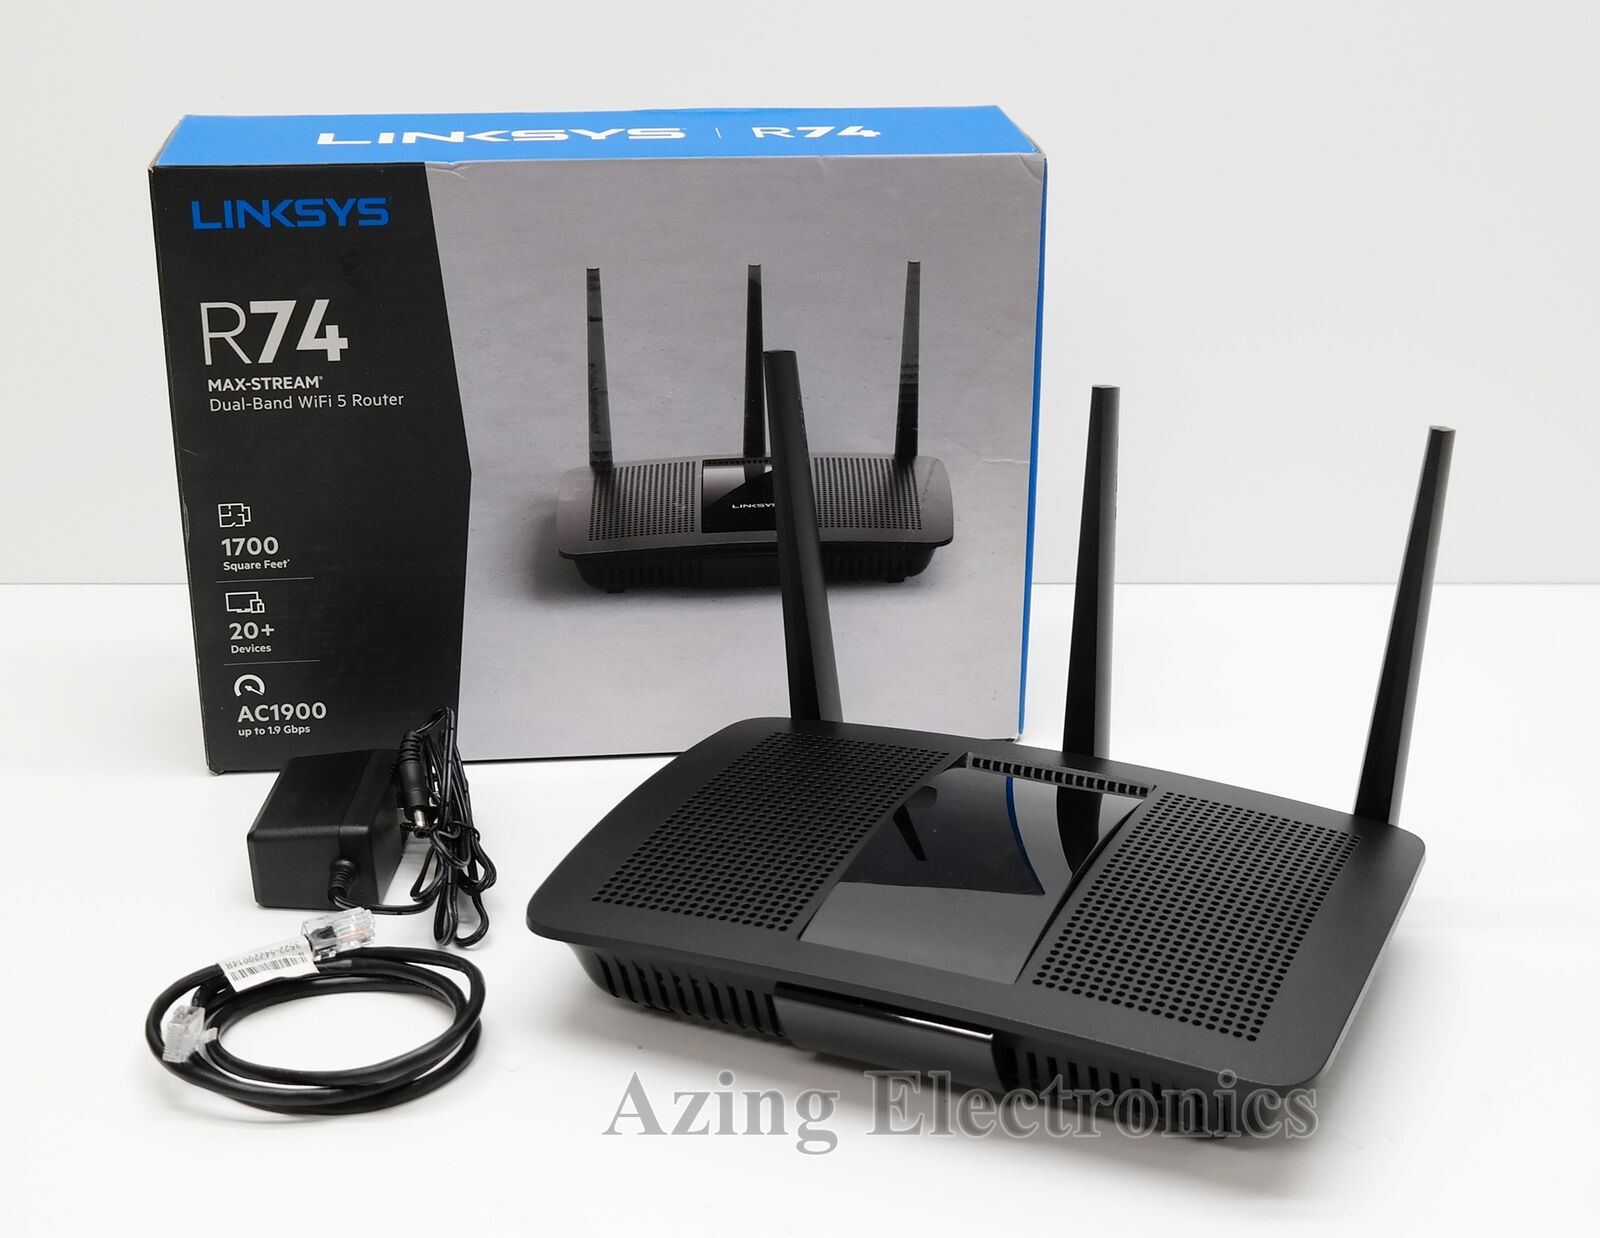 Linksys EA7450 Max-Stream Dual-Band AC1900 Wi-Fi 5 Router